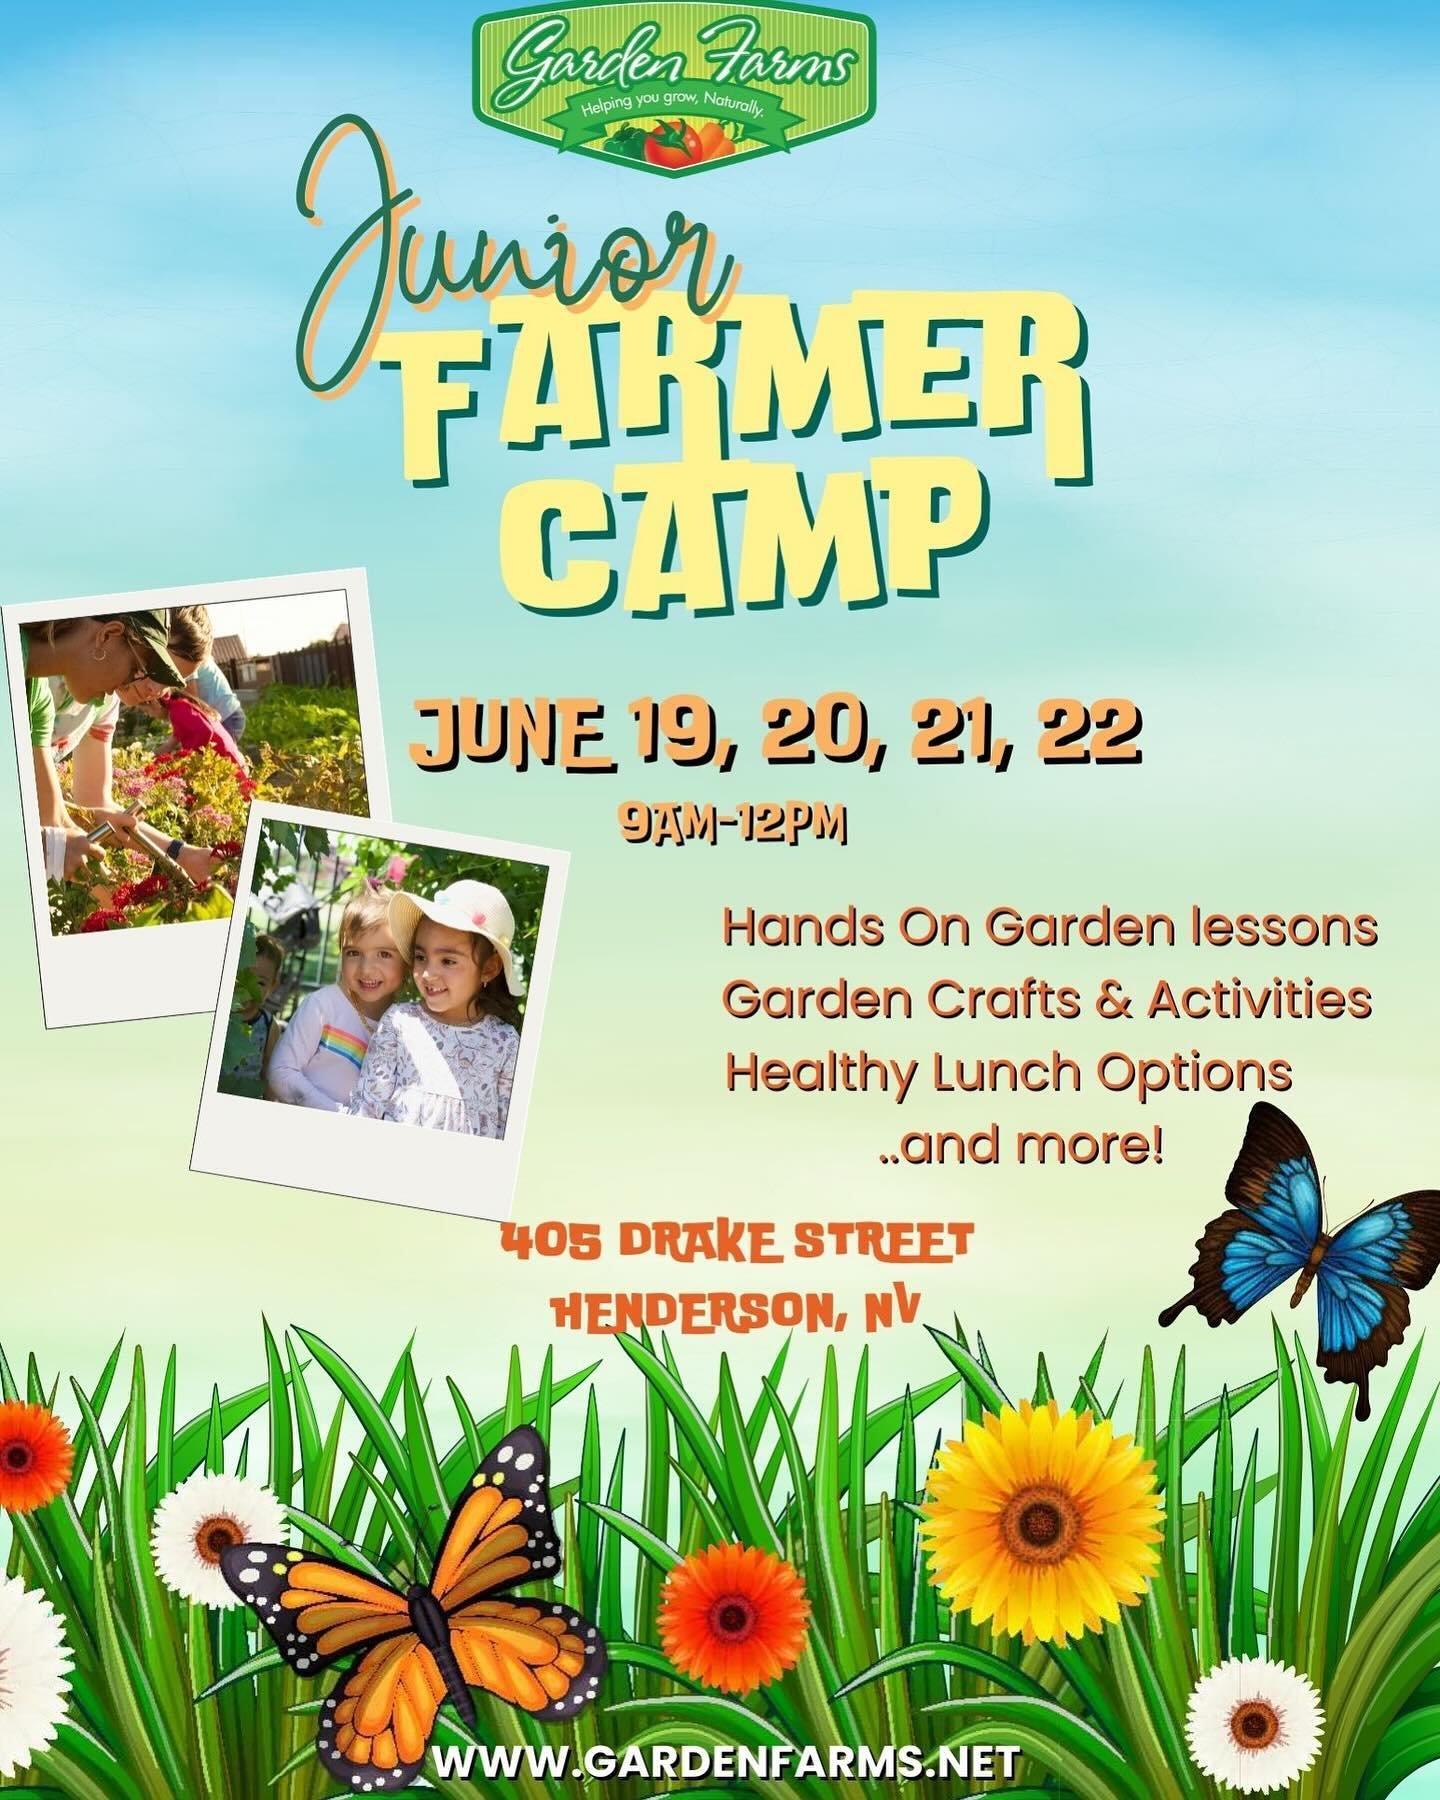 Garden Farms is proud to announce our First Annual Junior Farmer Camp!👩&zwj;🌾

This 4 day kids summer camp offers Las Vegas youth a fun and safe enviromment to get their hands dirty, develop a hands on understanding of the importance of permacultur